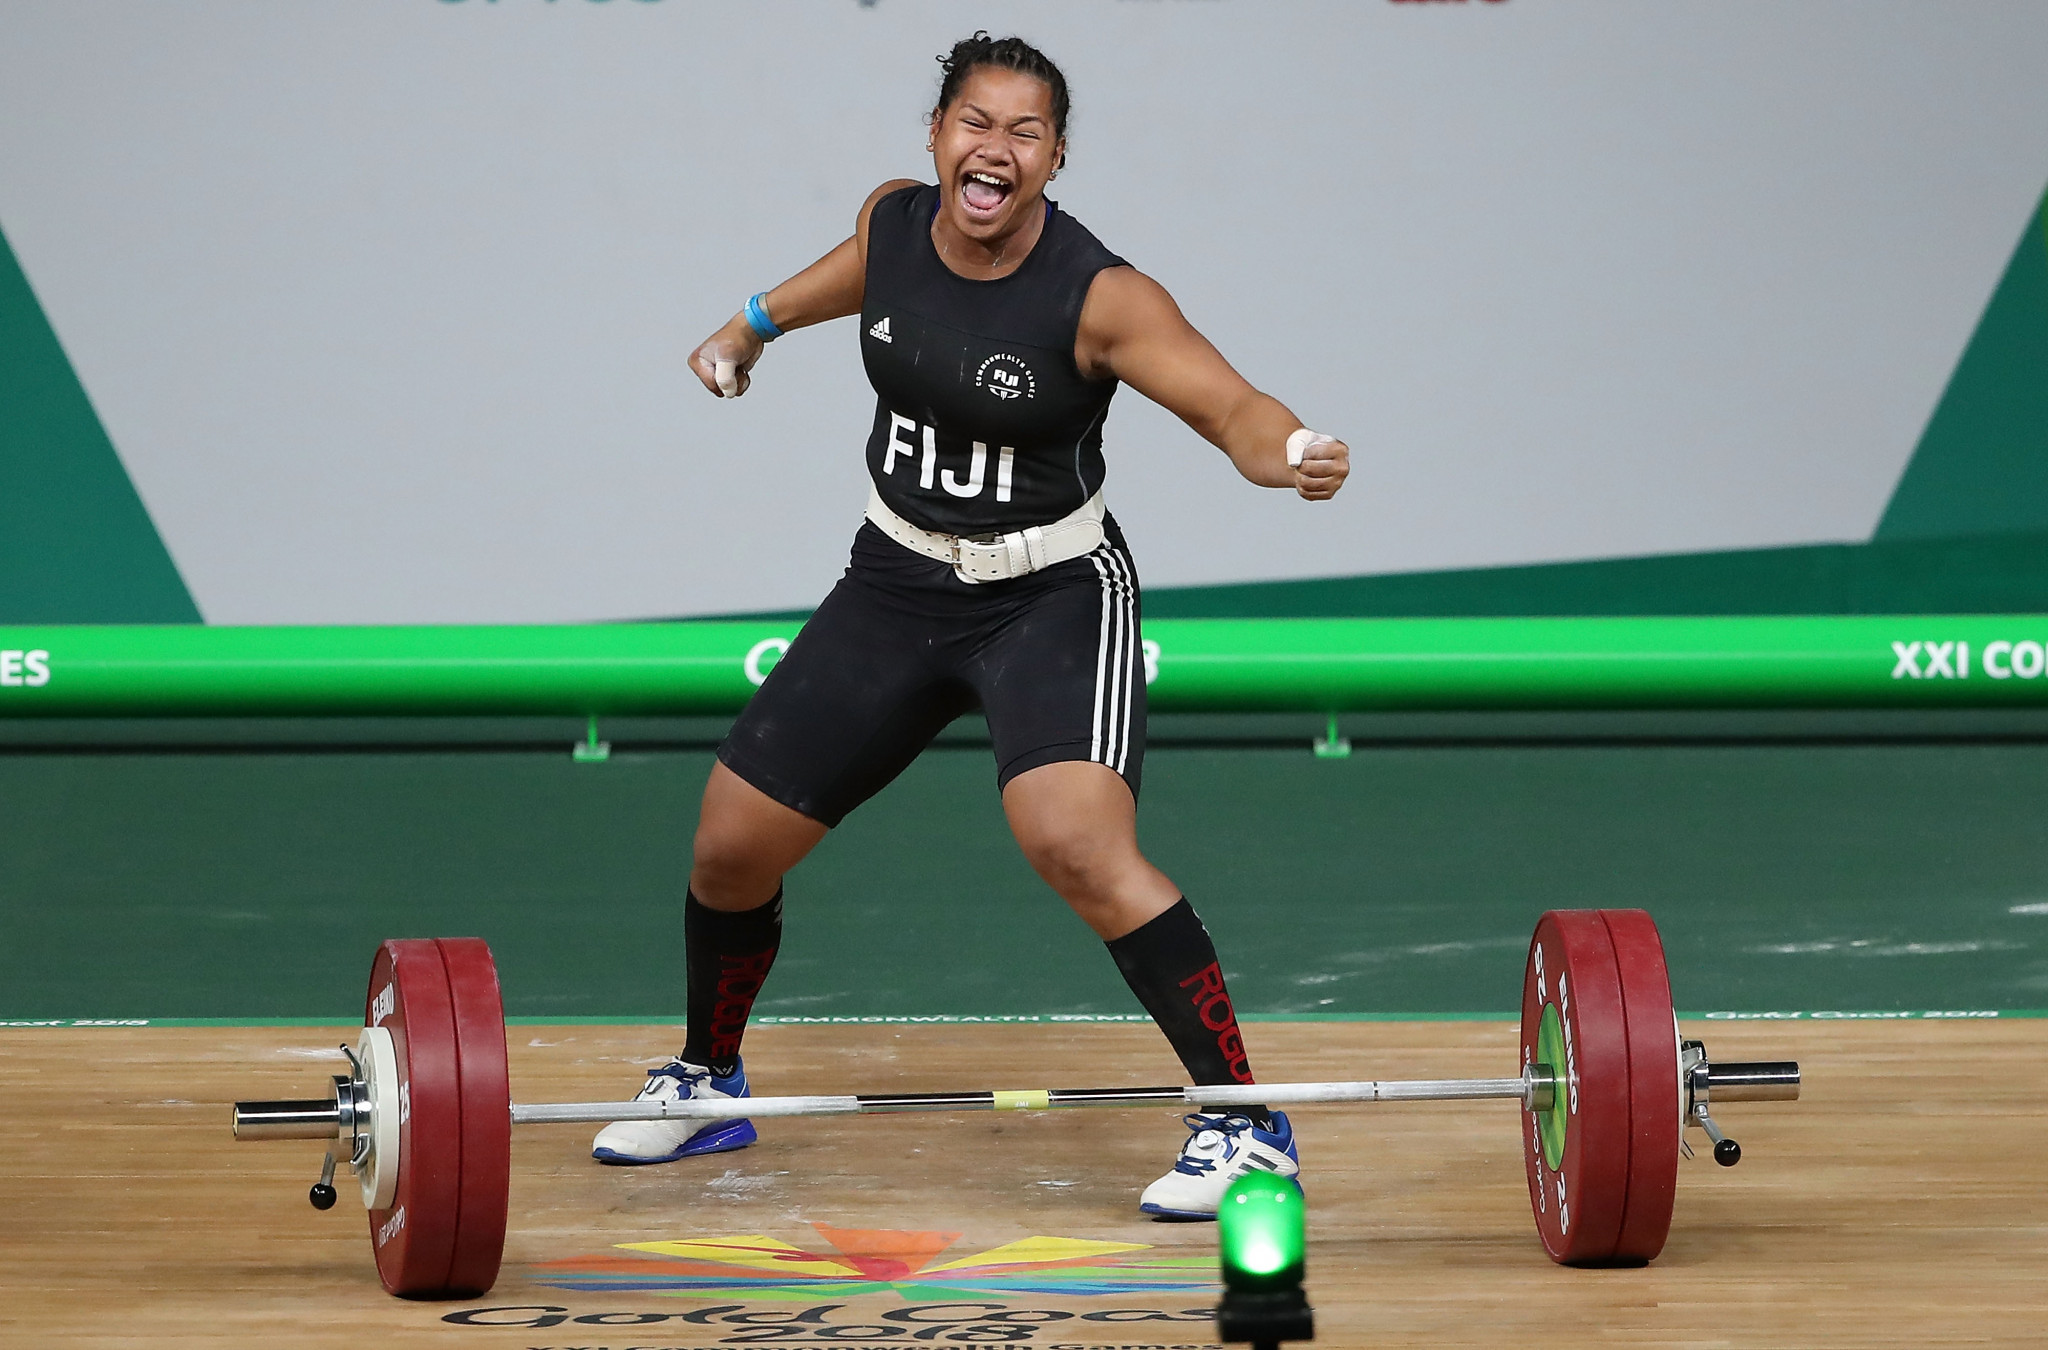 Sam Coffa has been accused of wanting to shoehorn Eileen Cikamatana, who now competes for Australia after switching from Fiji, into the Tokyo 2020 Olympic Games ©Getty Images